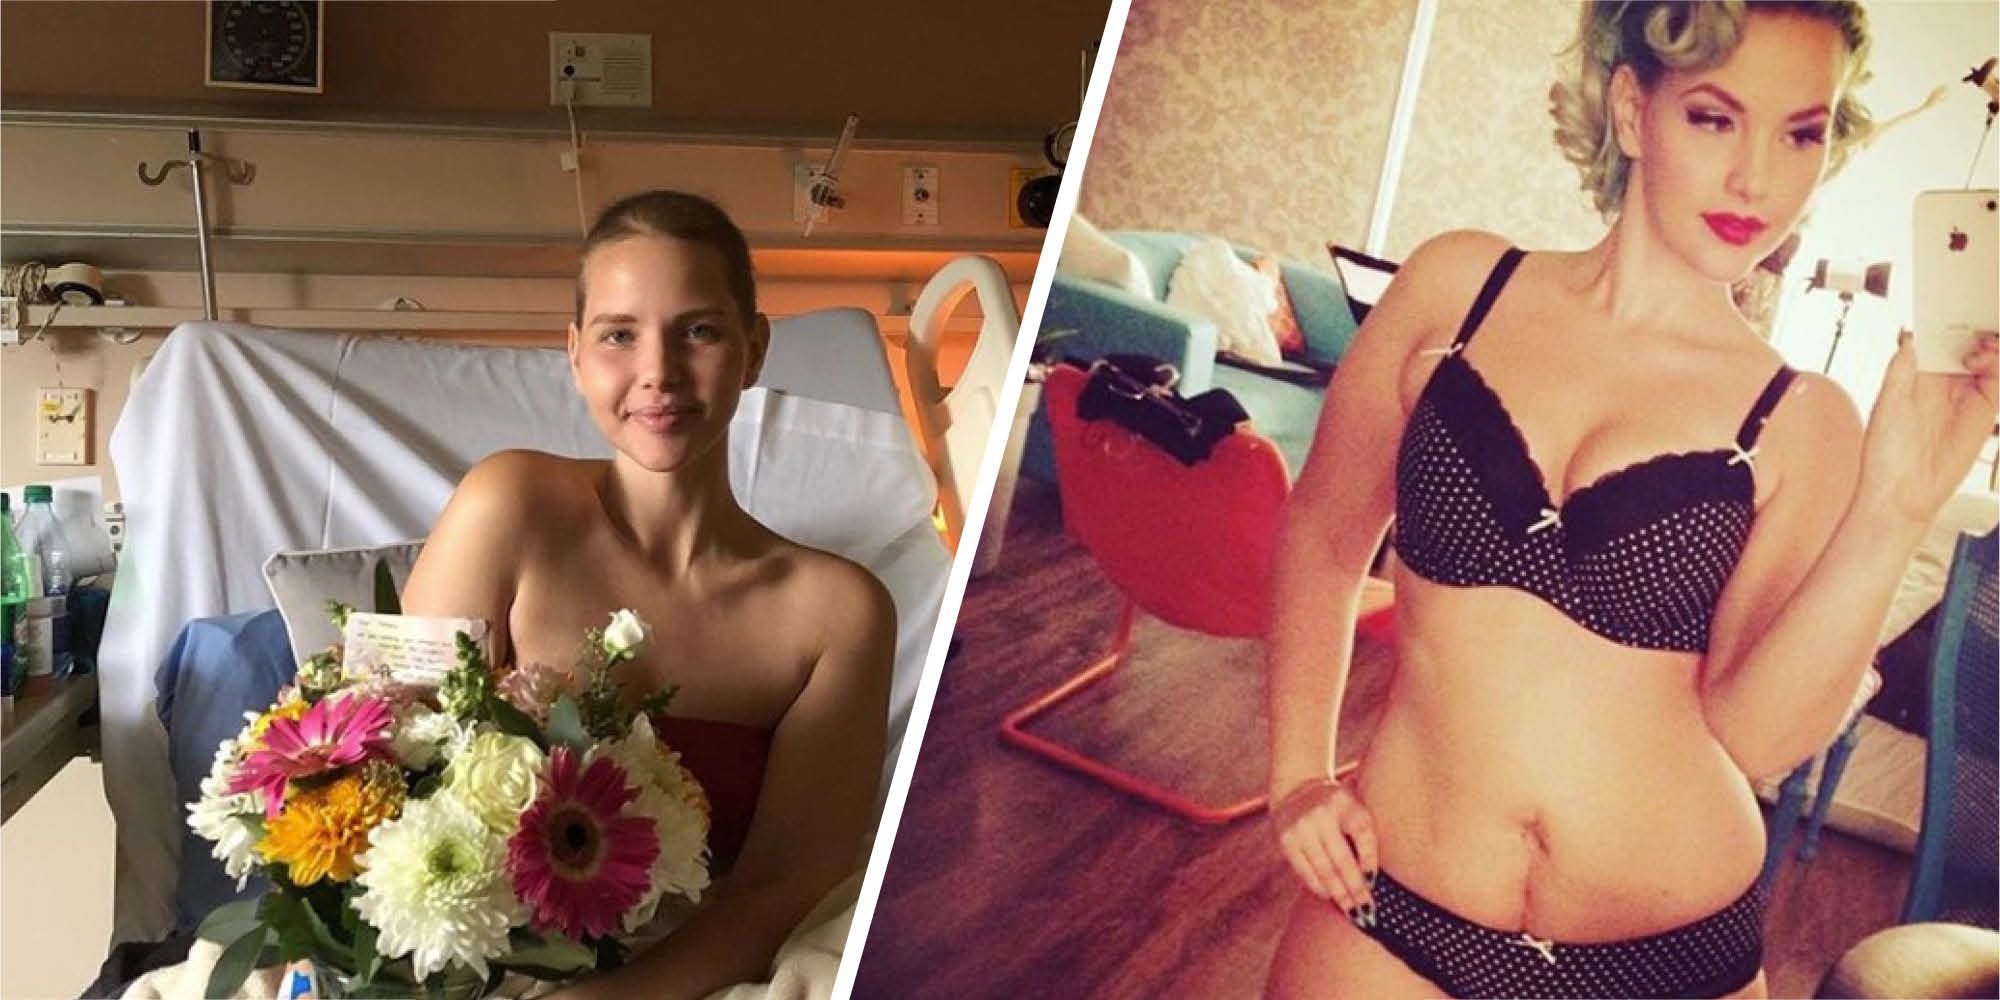 Model who proudly showed off surgery scars has died of ovarian cancer